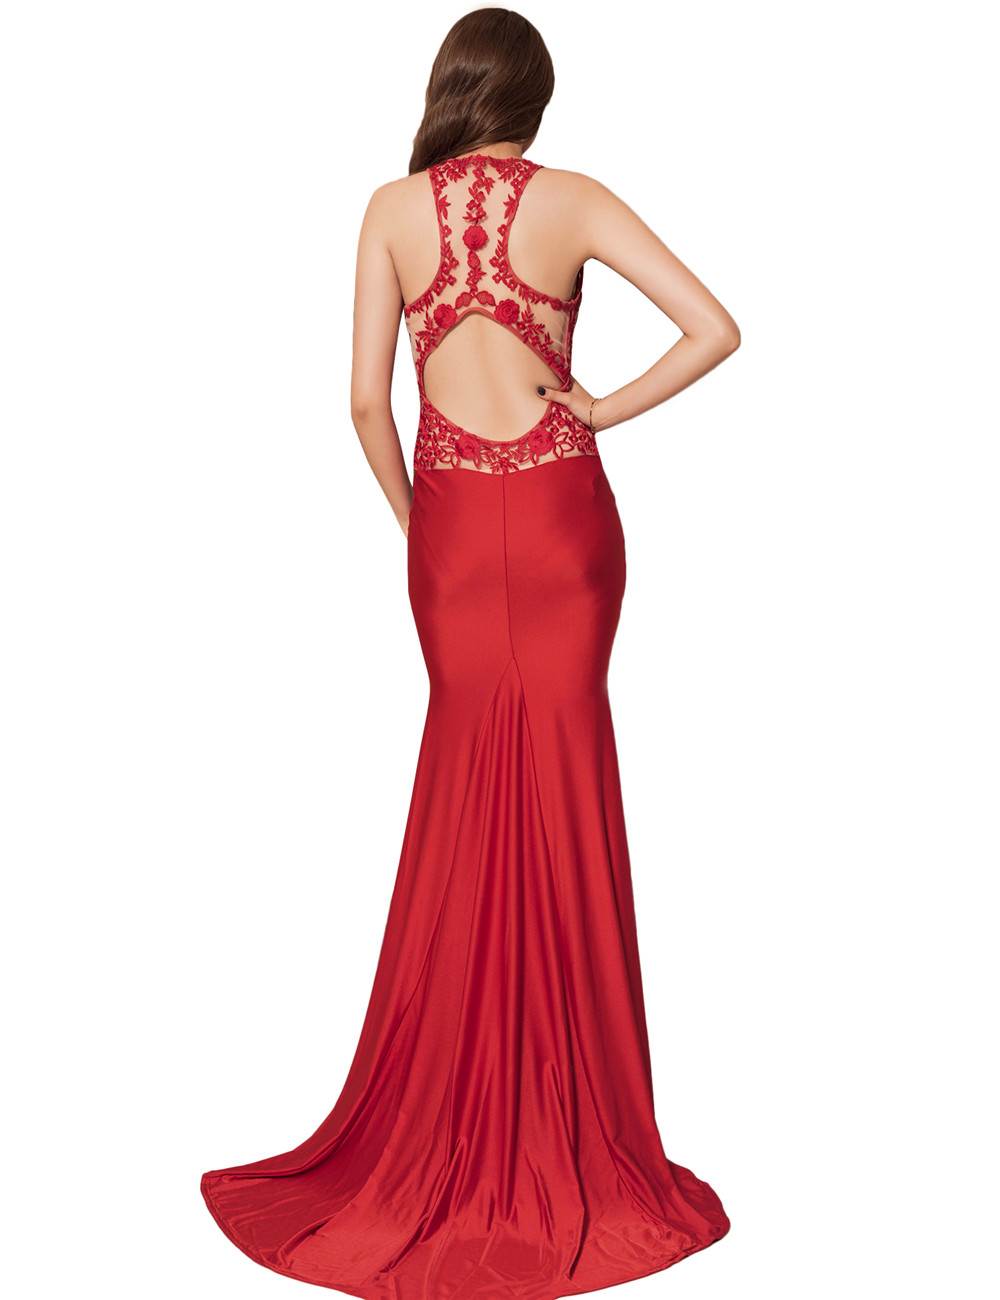 Cheap High Neck Red Embroidery Flower Backless Party Dress From China